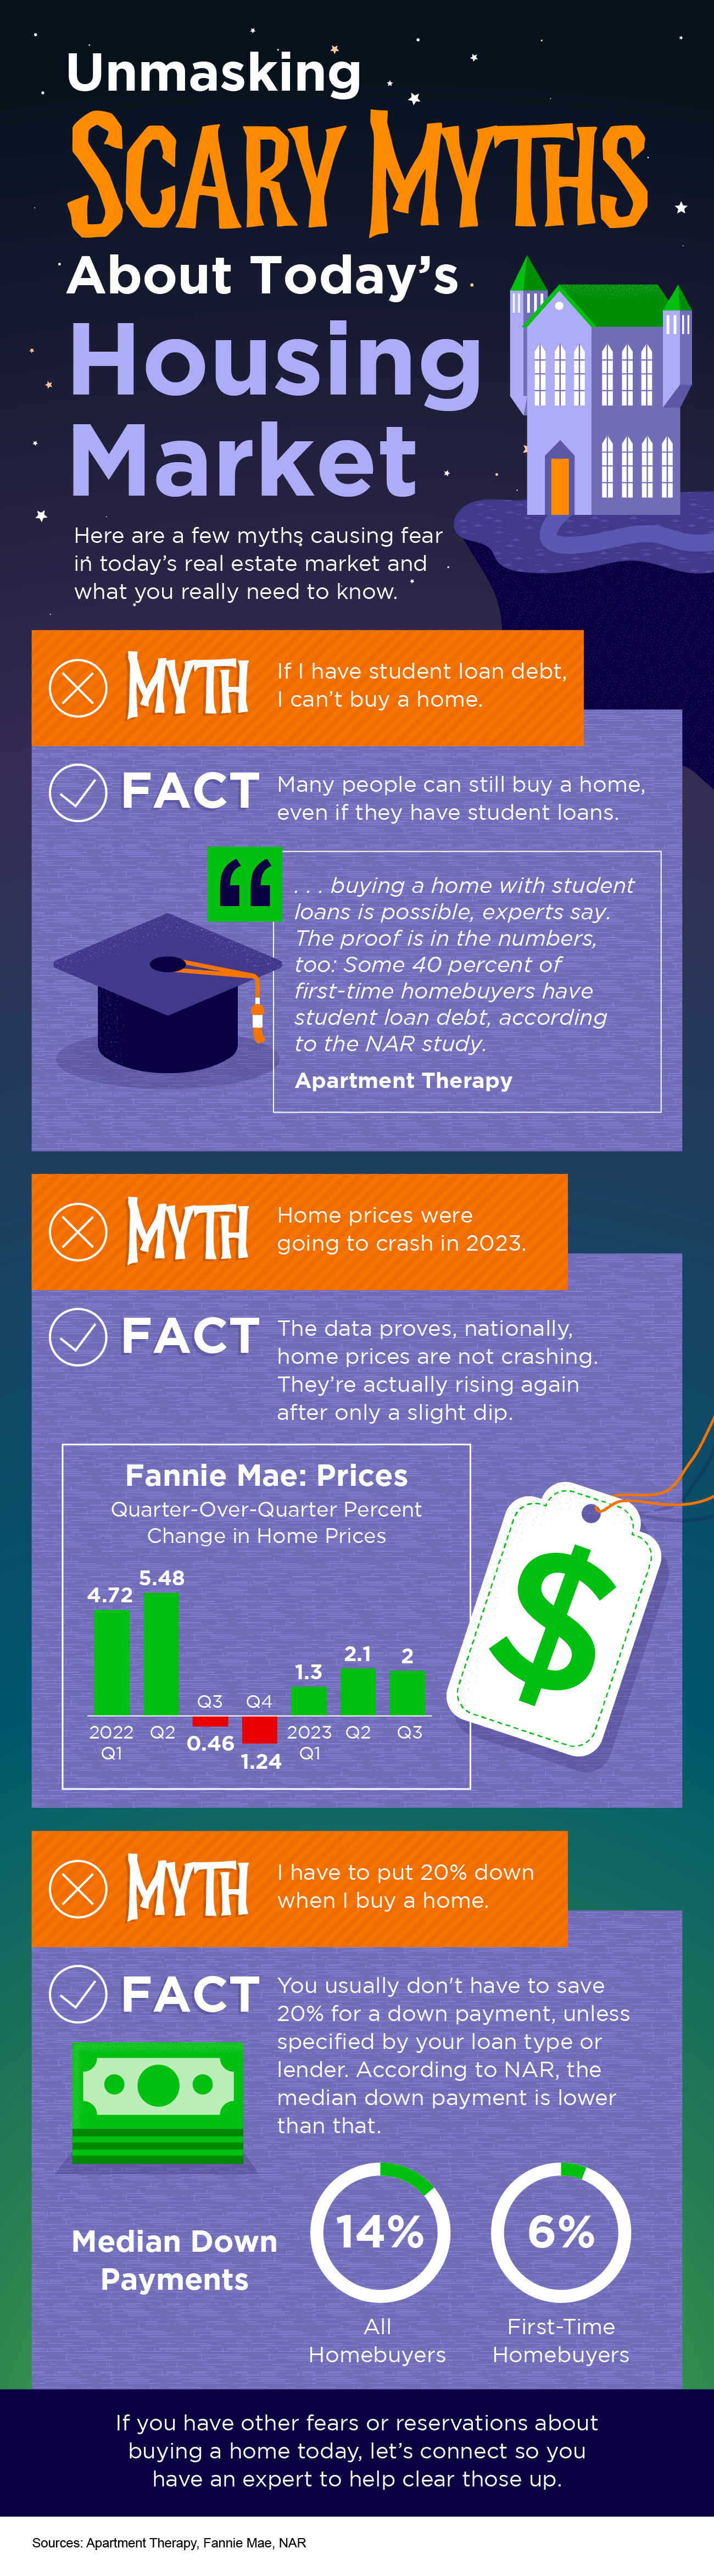 unmasking-scary-myths-about-todays-housing-market-infographic